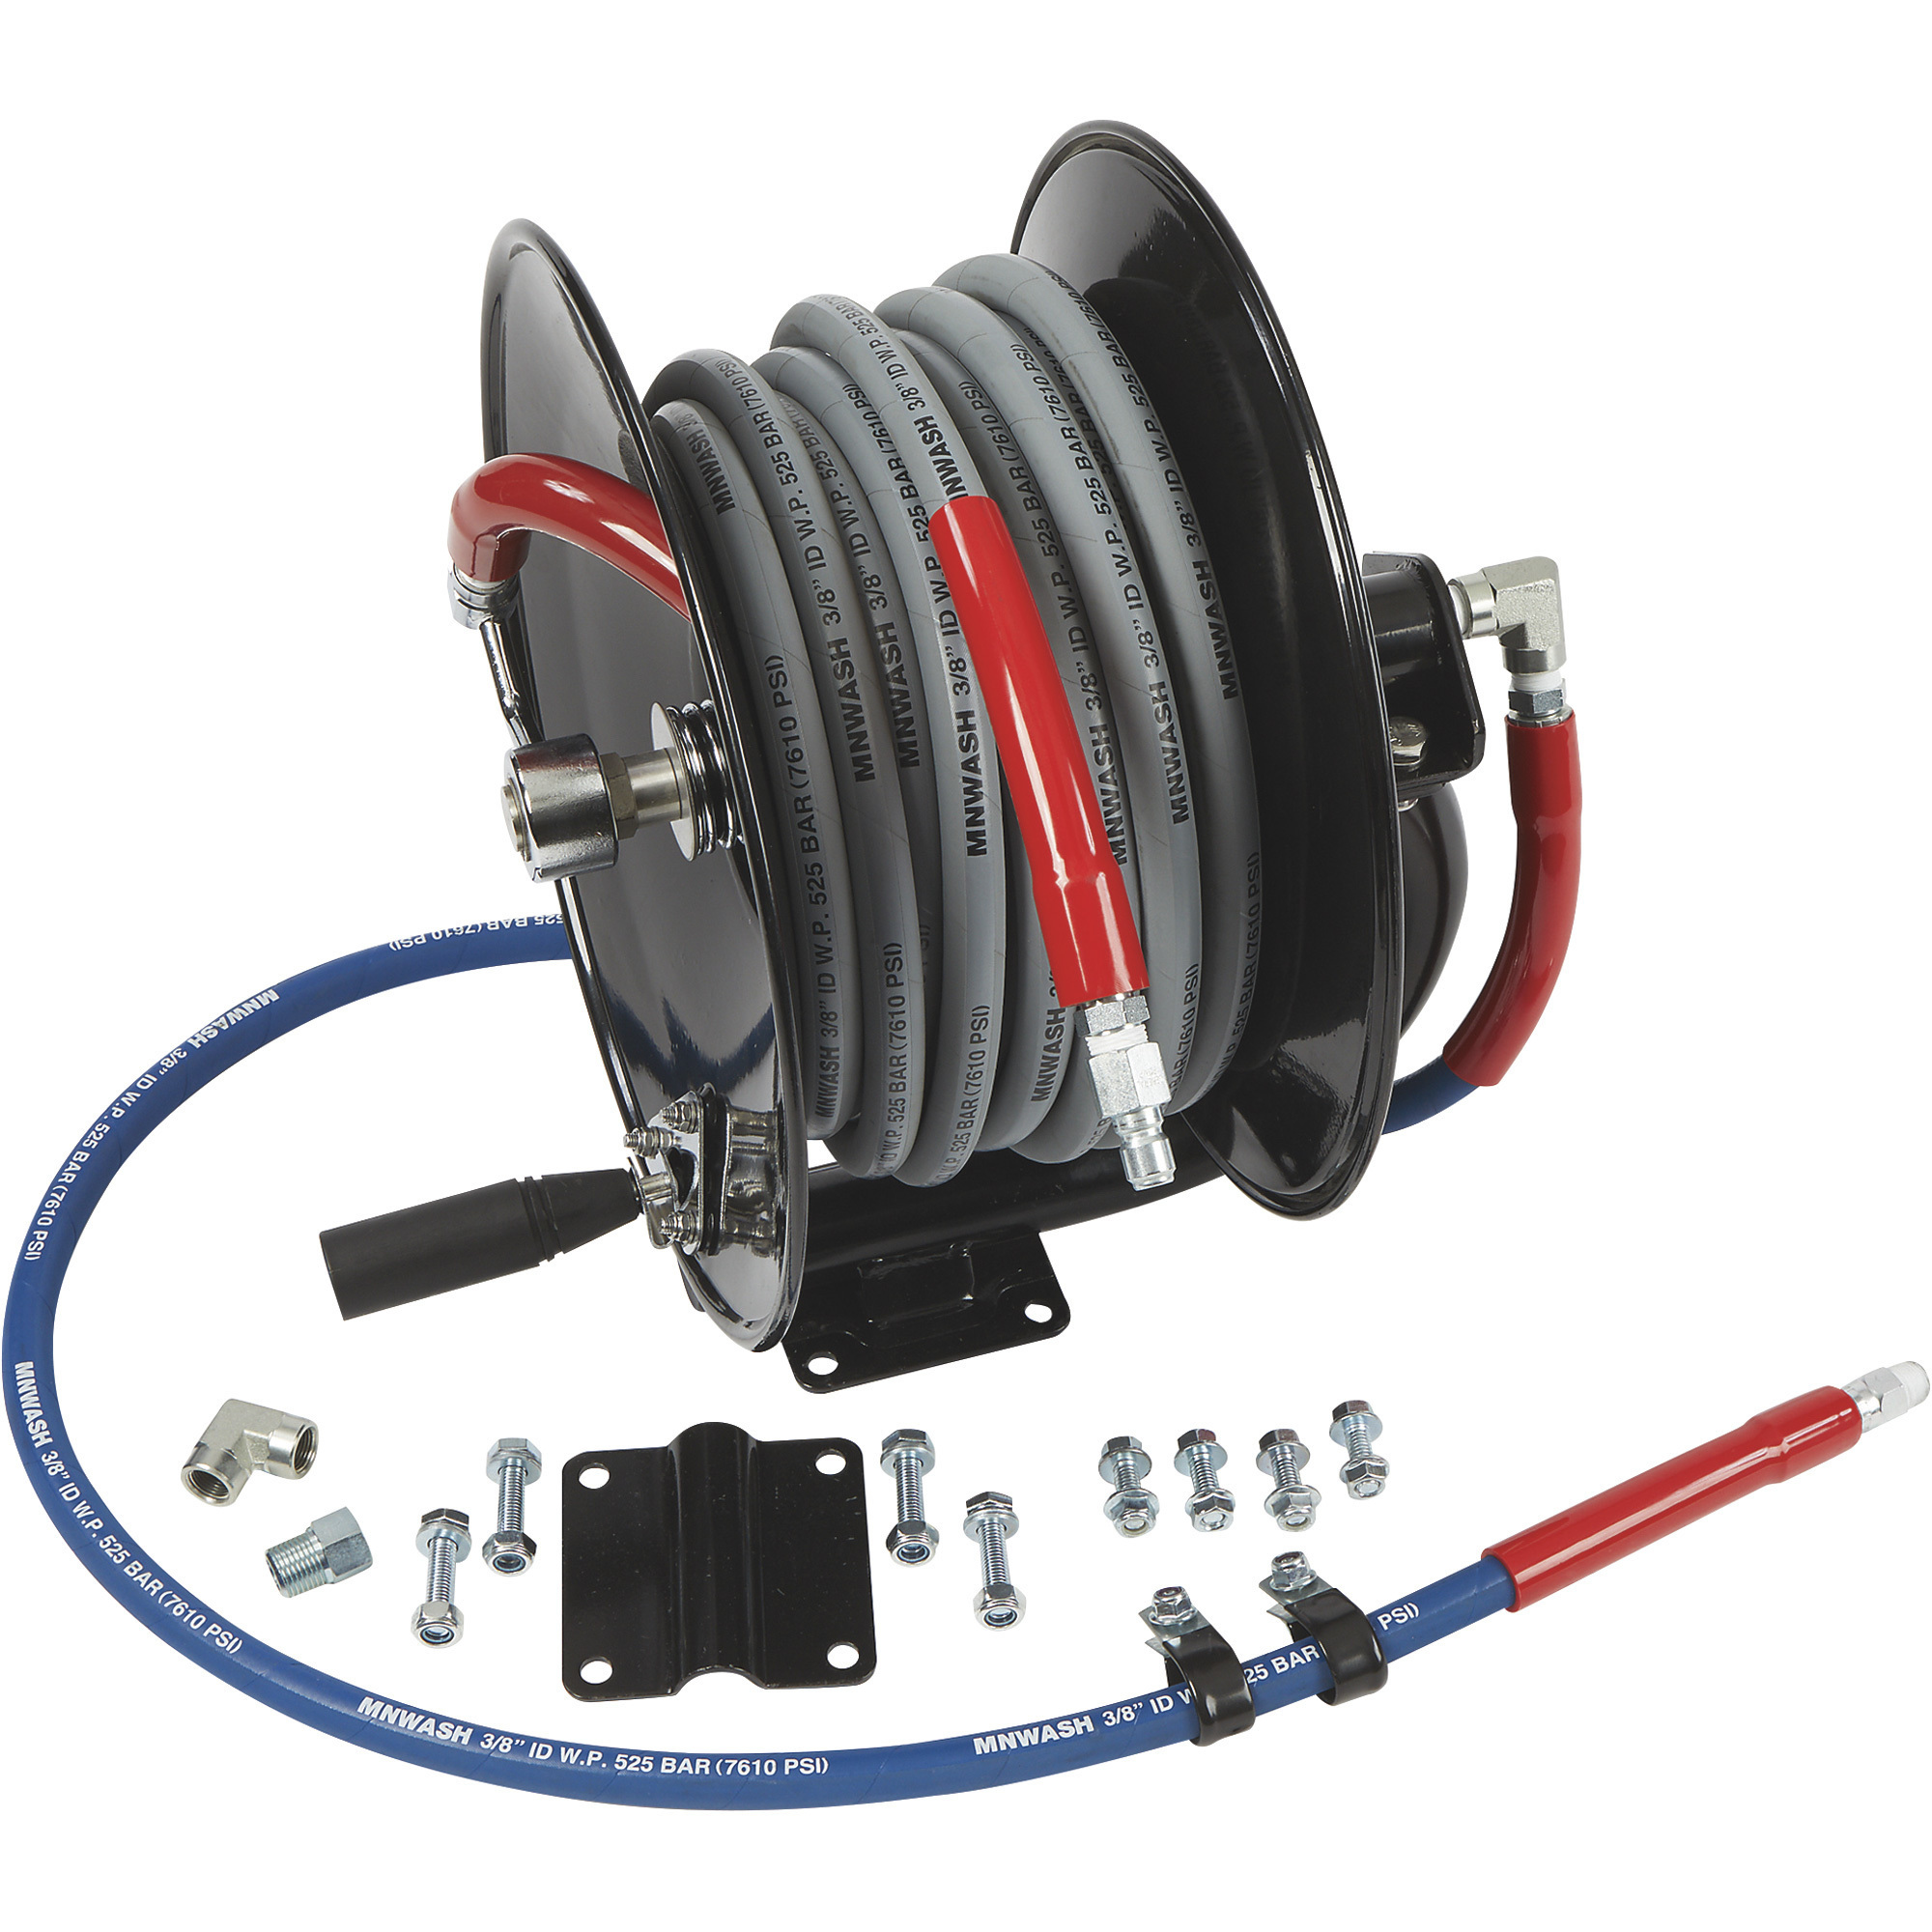 Coxreels 112-3-100 Compact Hand Crank Hose Reel - 3/8 in. x 100 ft.